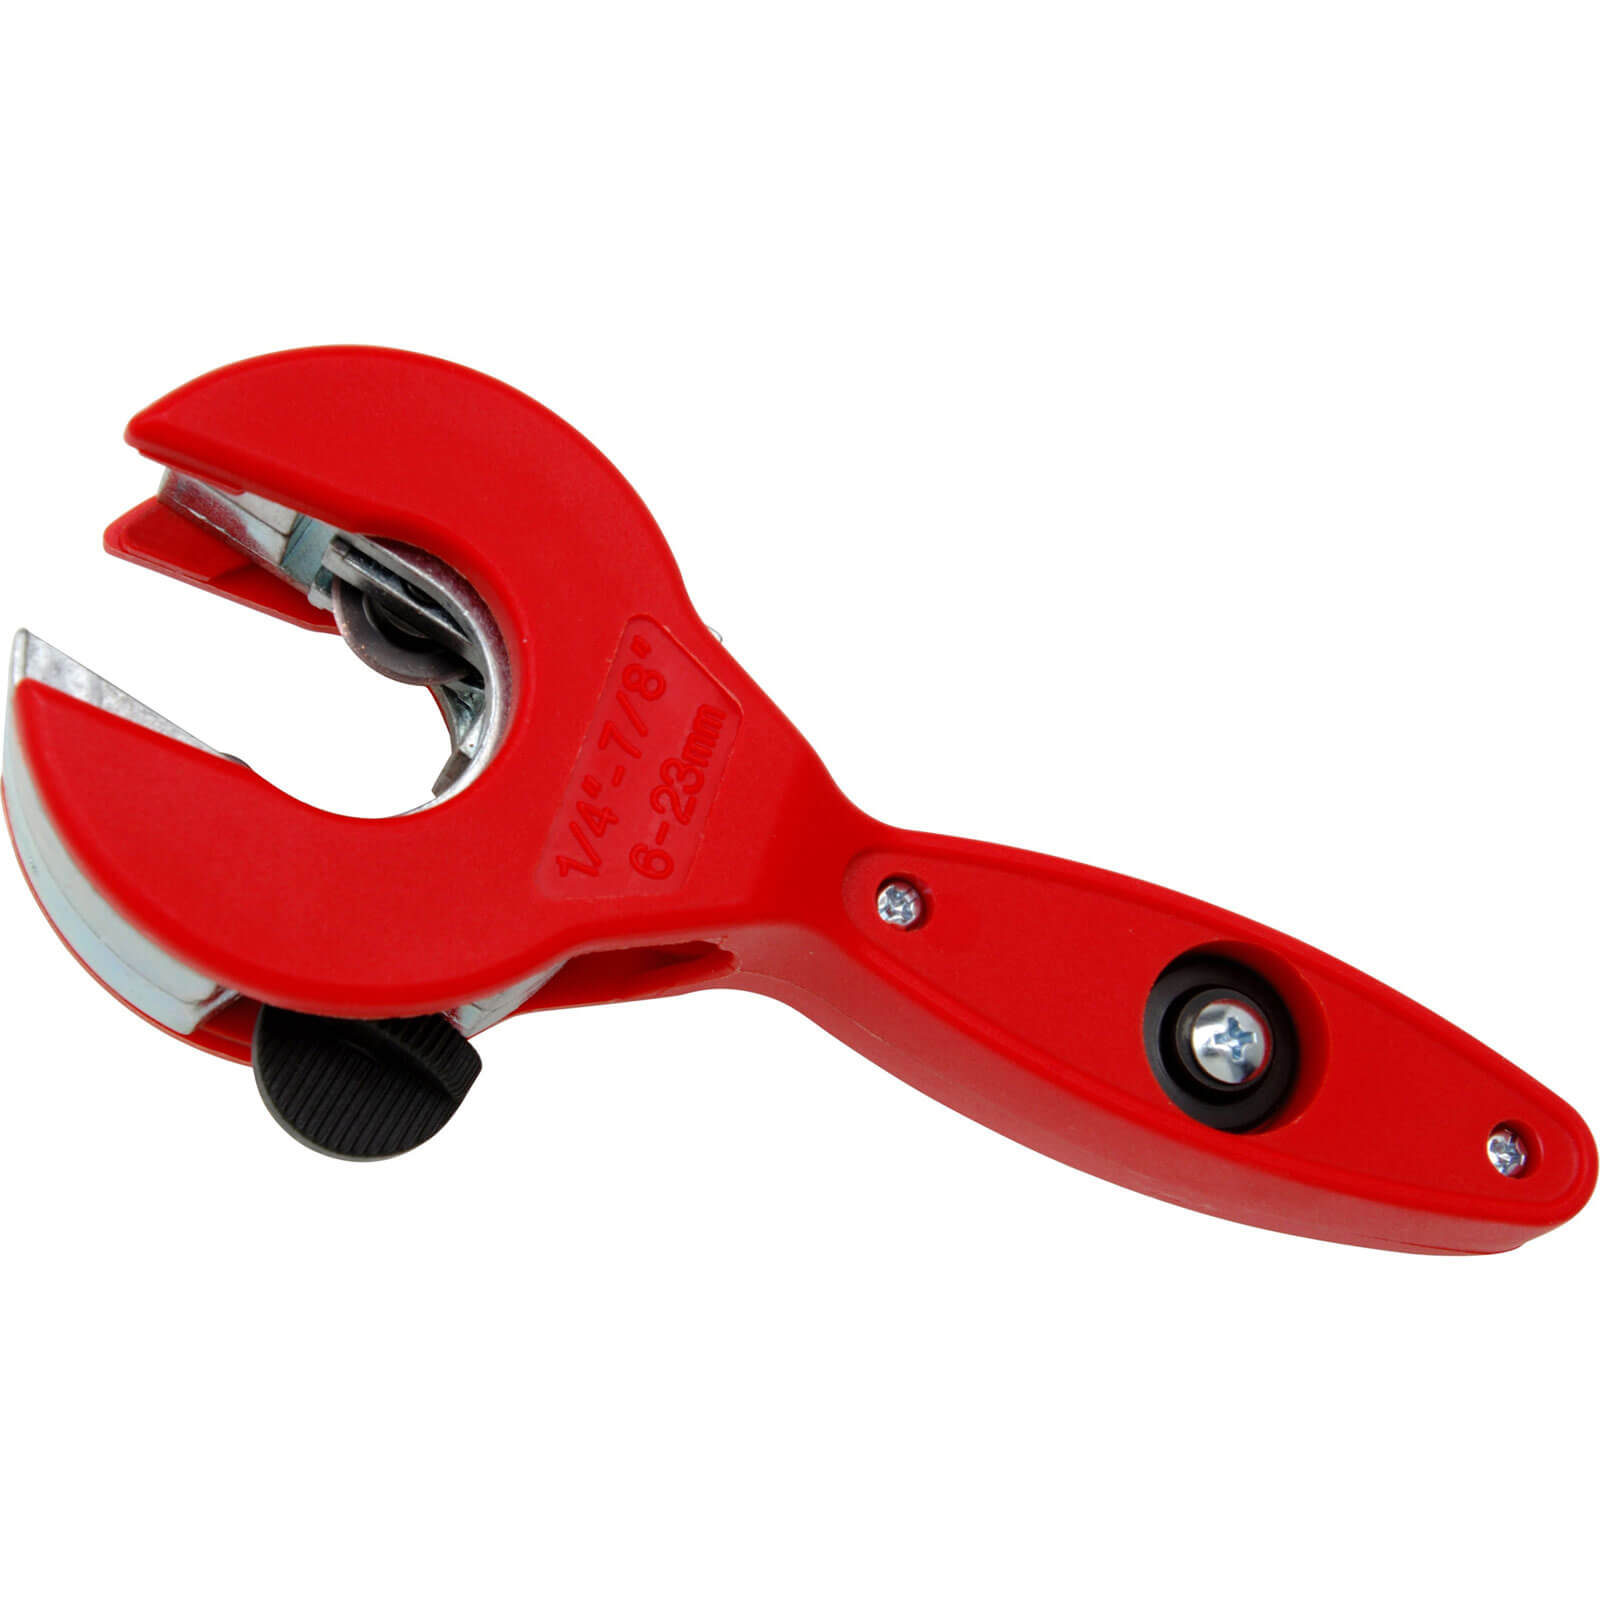 Photo of Wiss Ratchet Pipe Cutters 6mm - 23mm